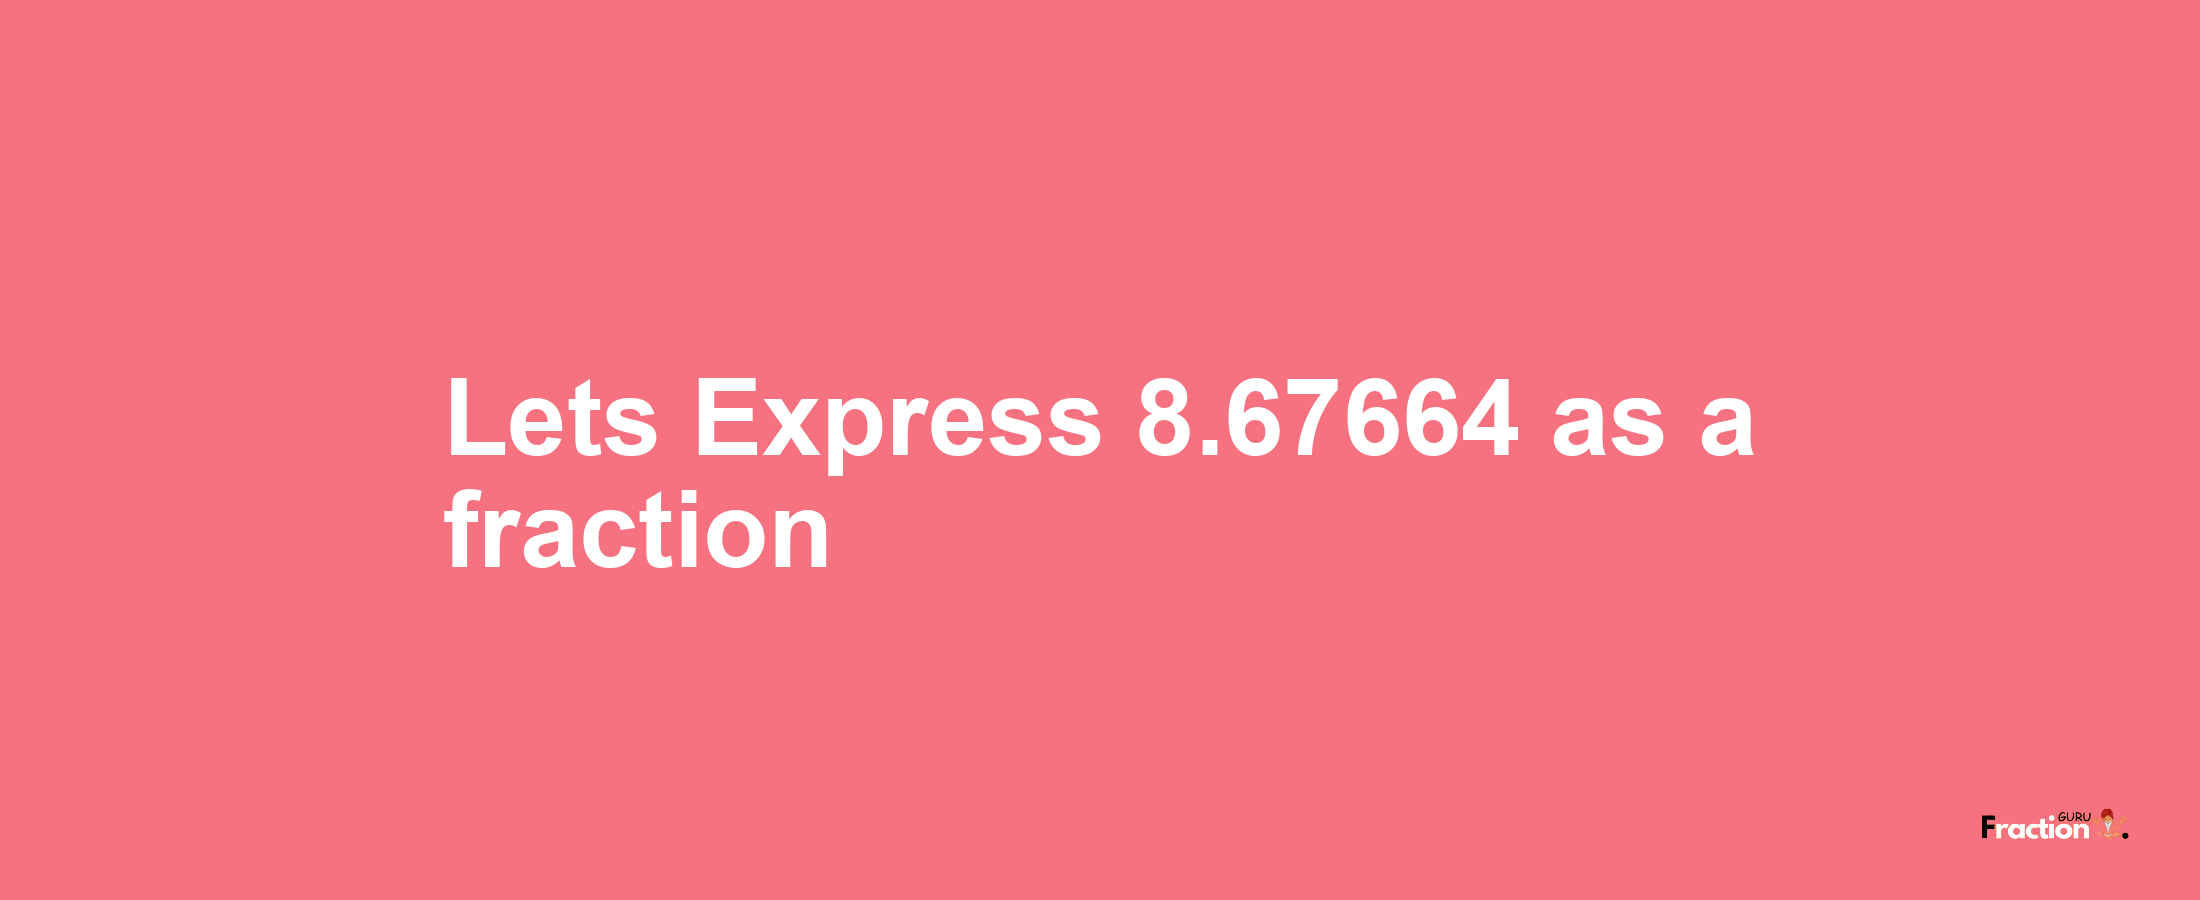 Lets Express 8.67664 as afraction